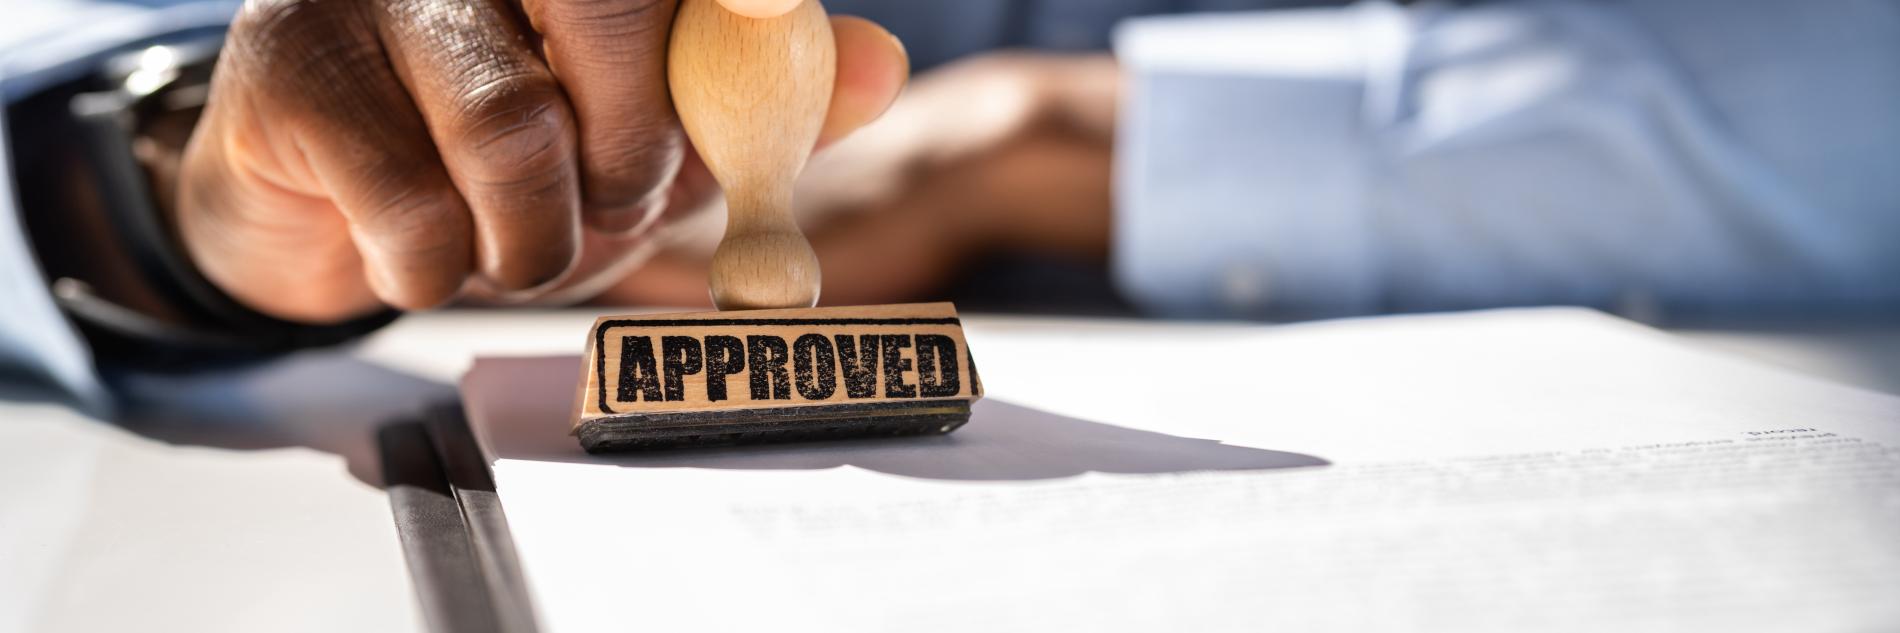 Approved Stamp: Pre Authorization and Prior Authorization Requirments Explained